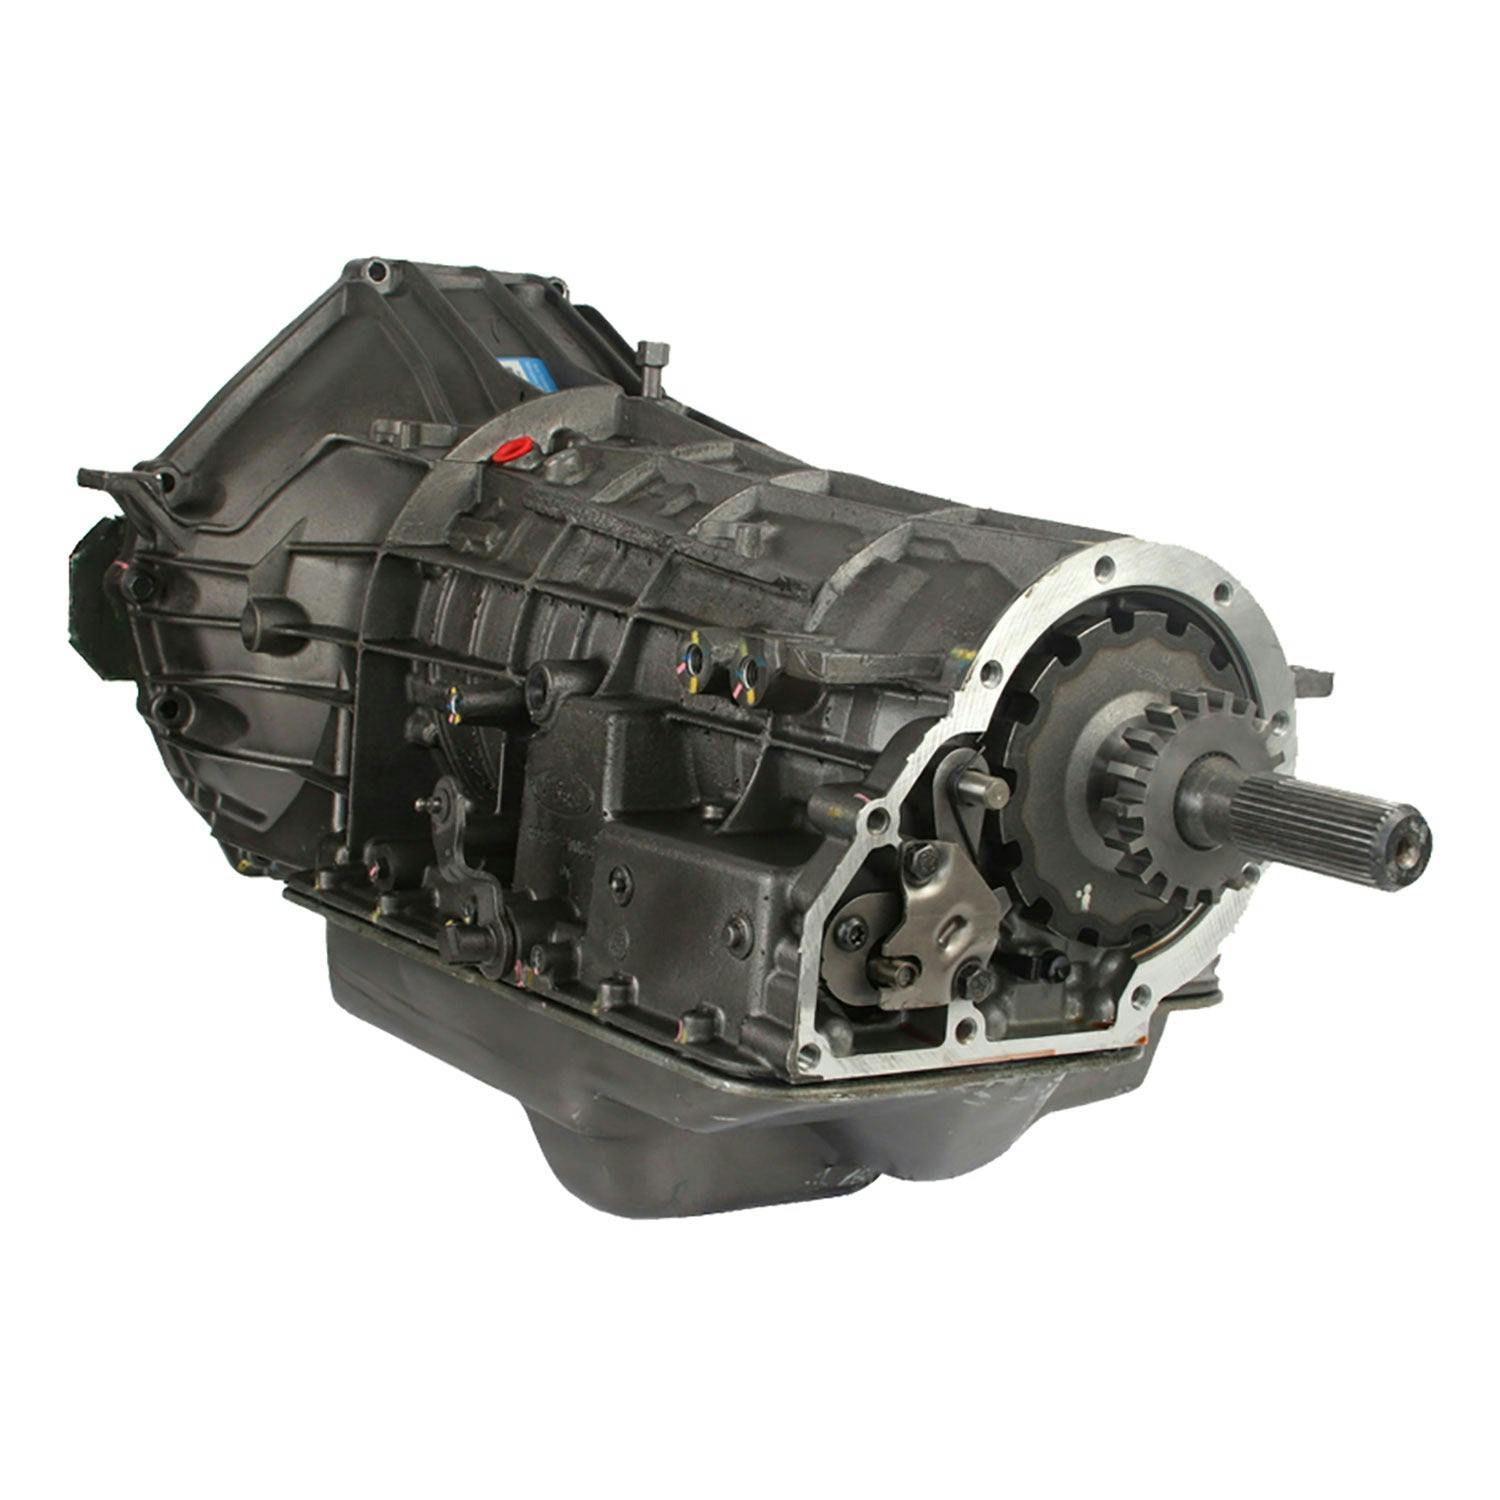 Automatic Transmission for 1997-1999 Ford E-150, 250, 350 Econoline/E-150, 350 Econoline Club Wagon/Expedition/F-150, 250, 250 Super Duty and Lincoln Navigator RWD with 5.4L V8 Engine